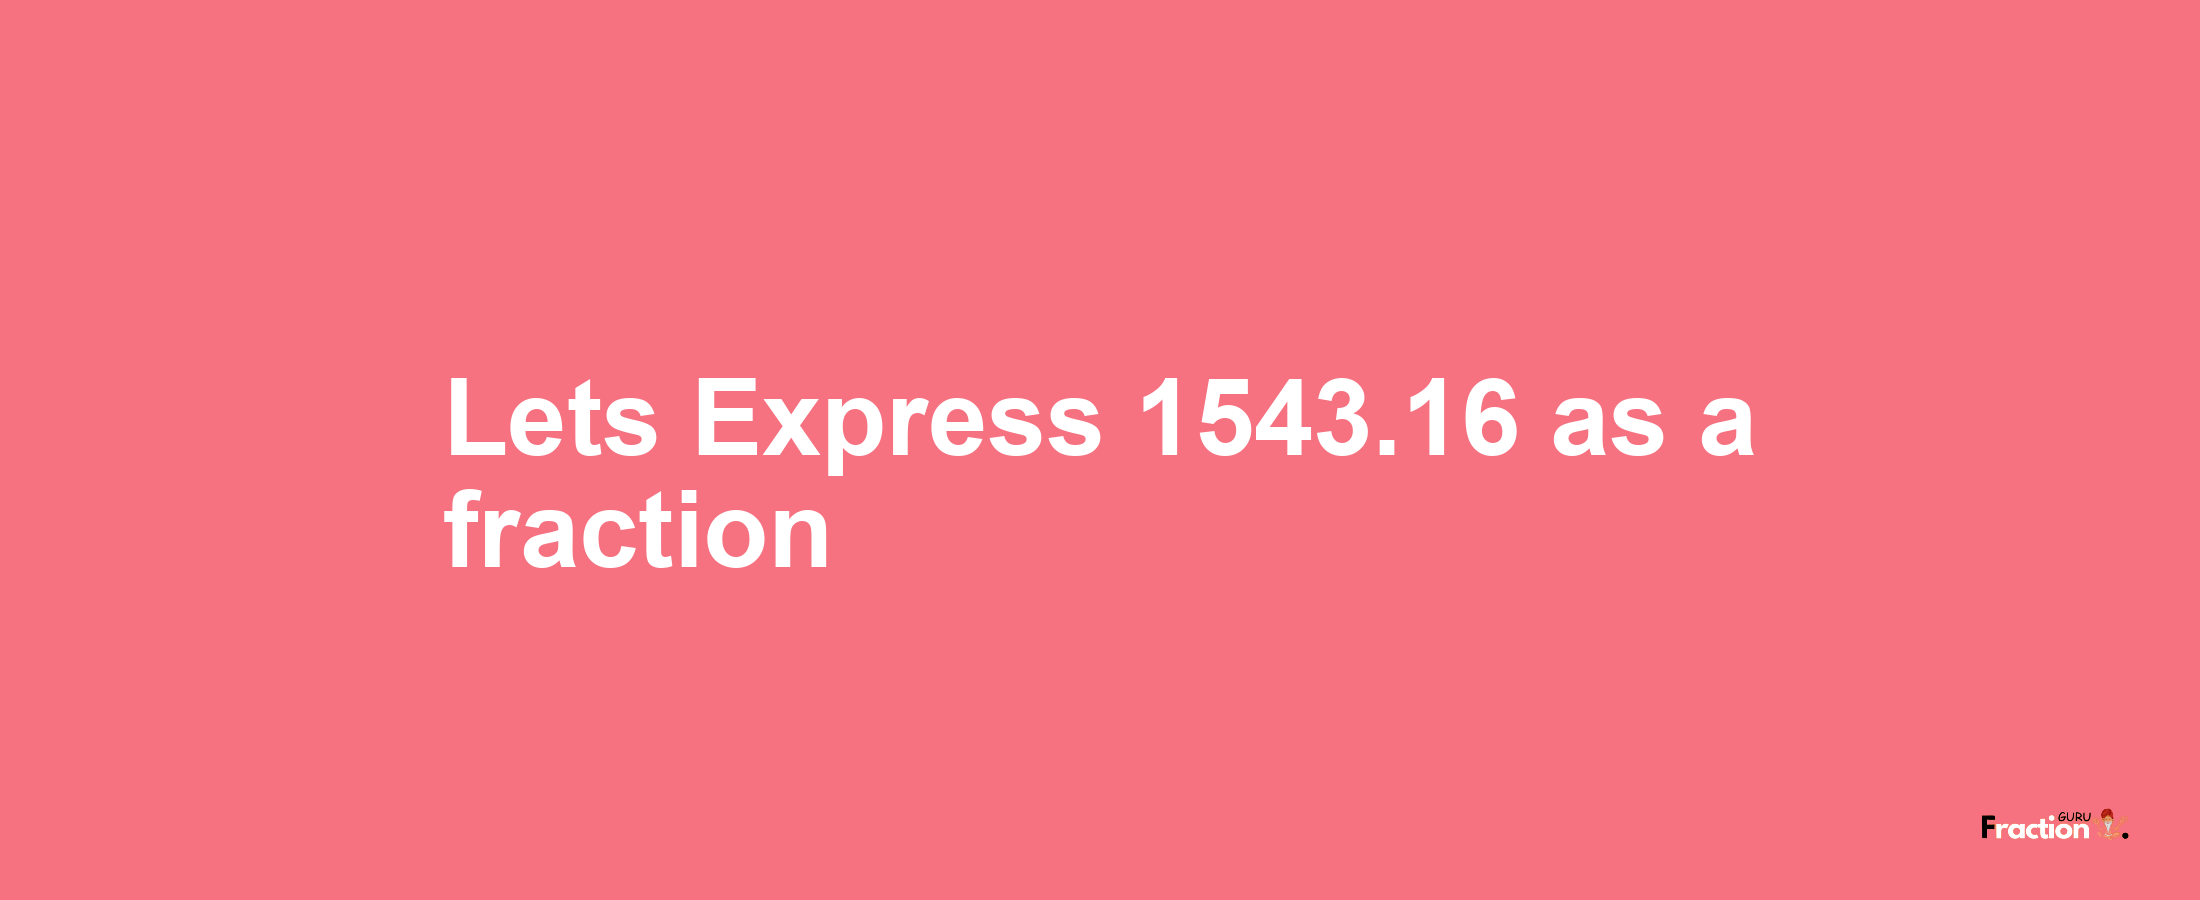 Lets Express 1543.16 as afraction